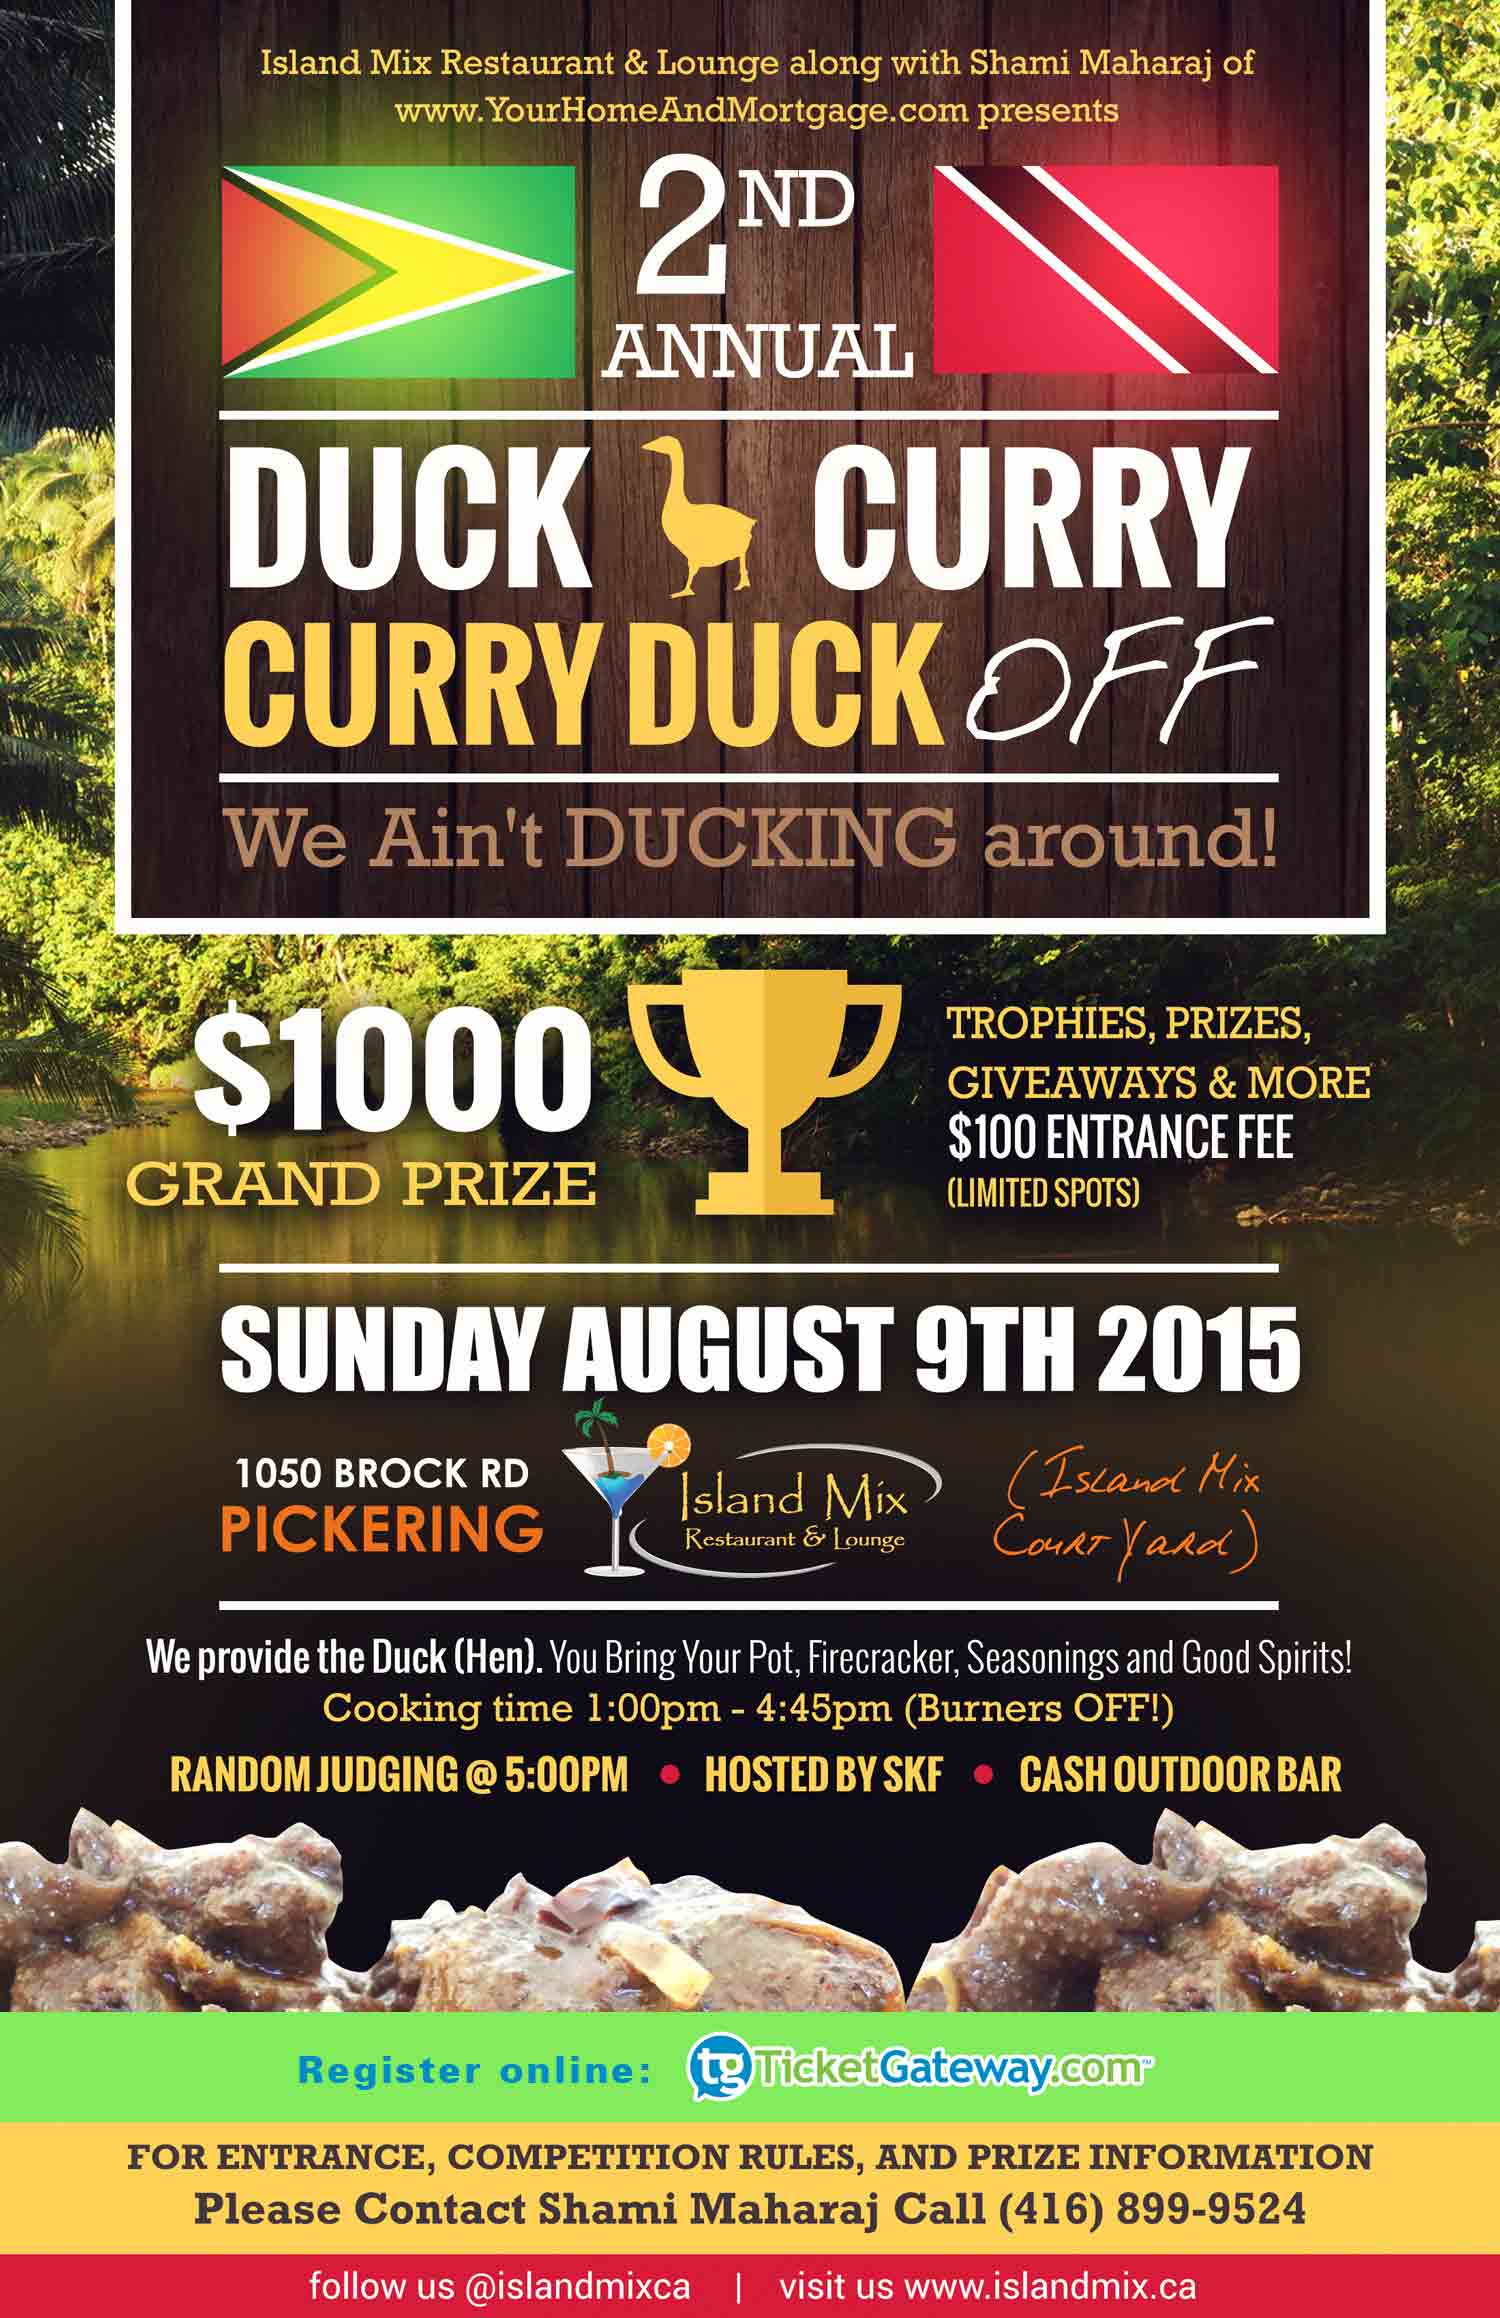 2nd Annual Duck Curry Curry Duck OFF Competition